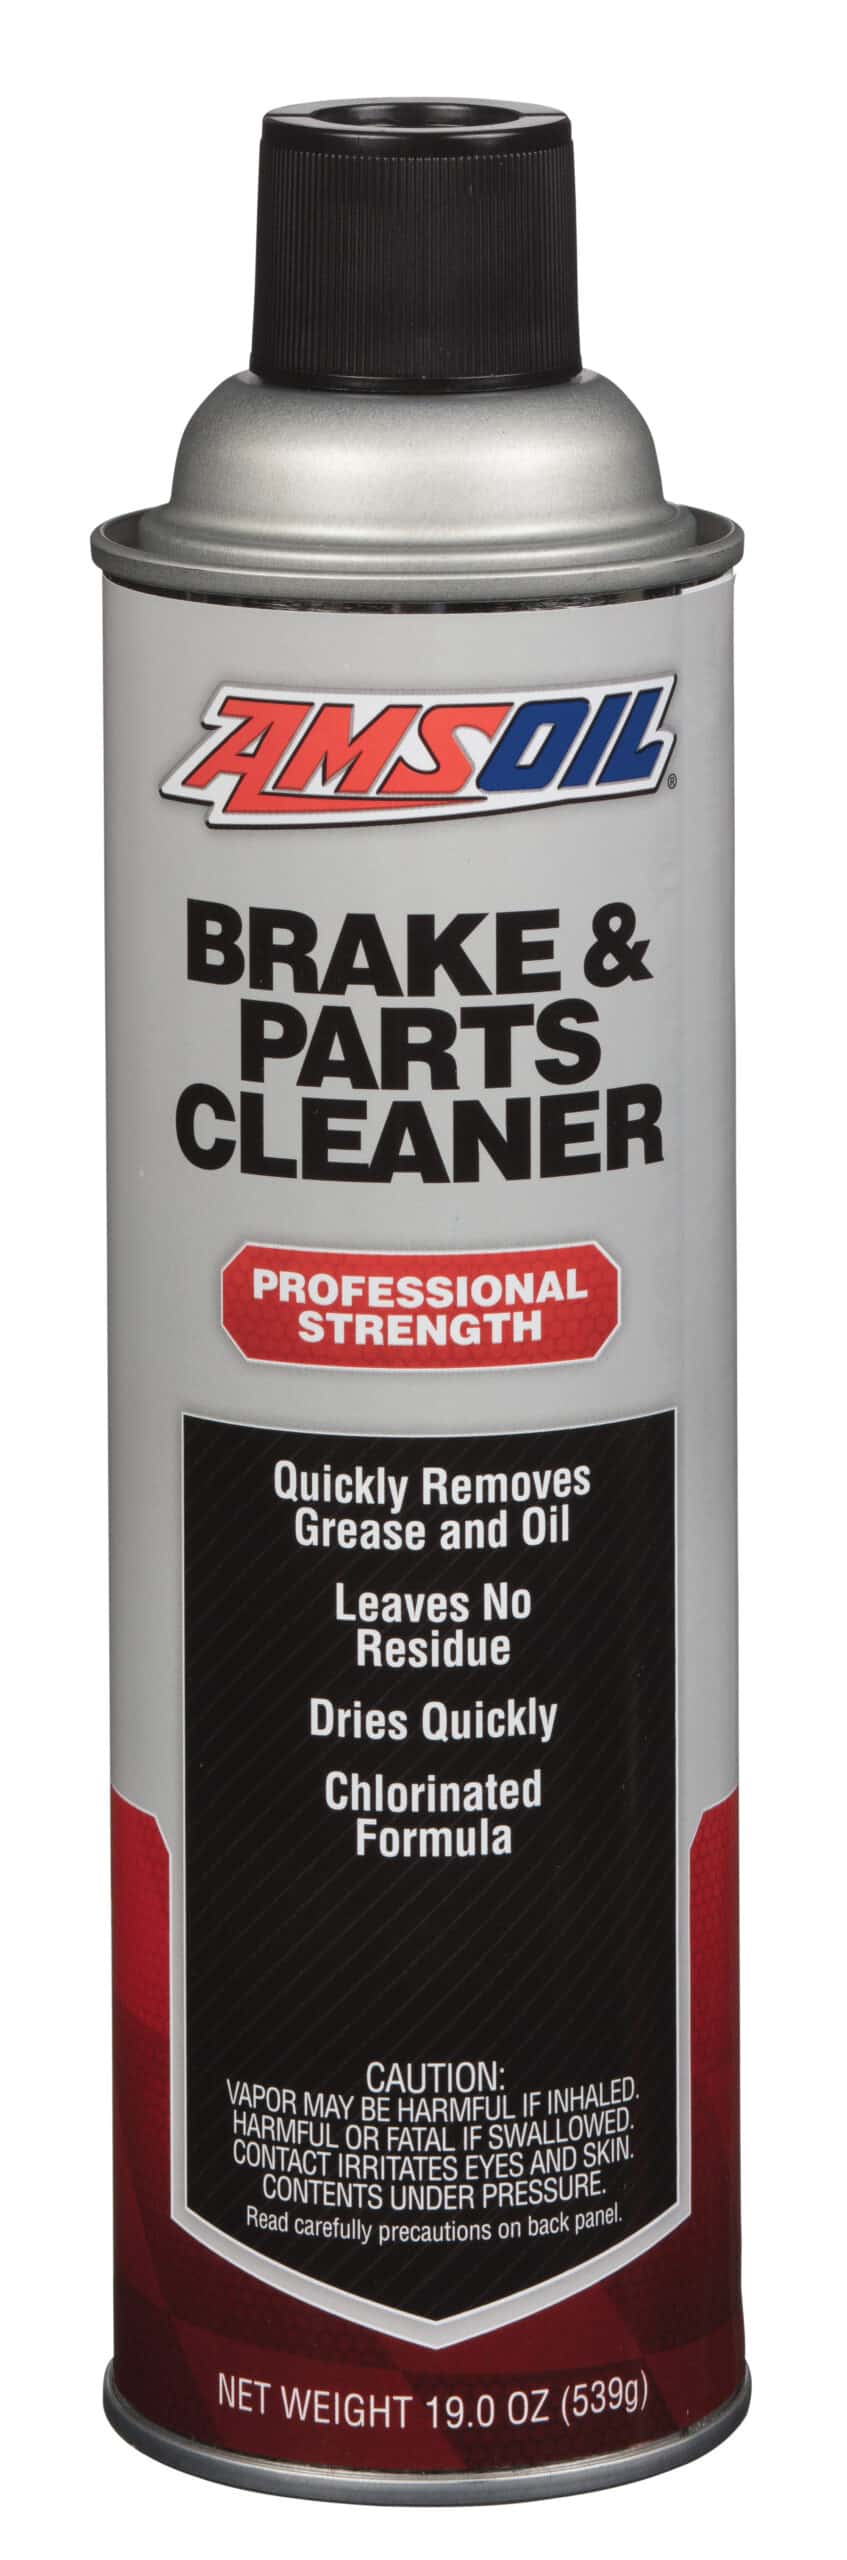 A bottle of AMSOIL Brake & Parts Cleaner (BPC), which helps to quickly removes oil, grease, brake fluid and other contaminants from brake parts and other automotive components.